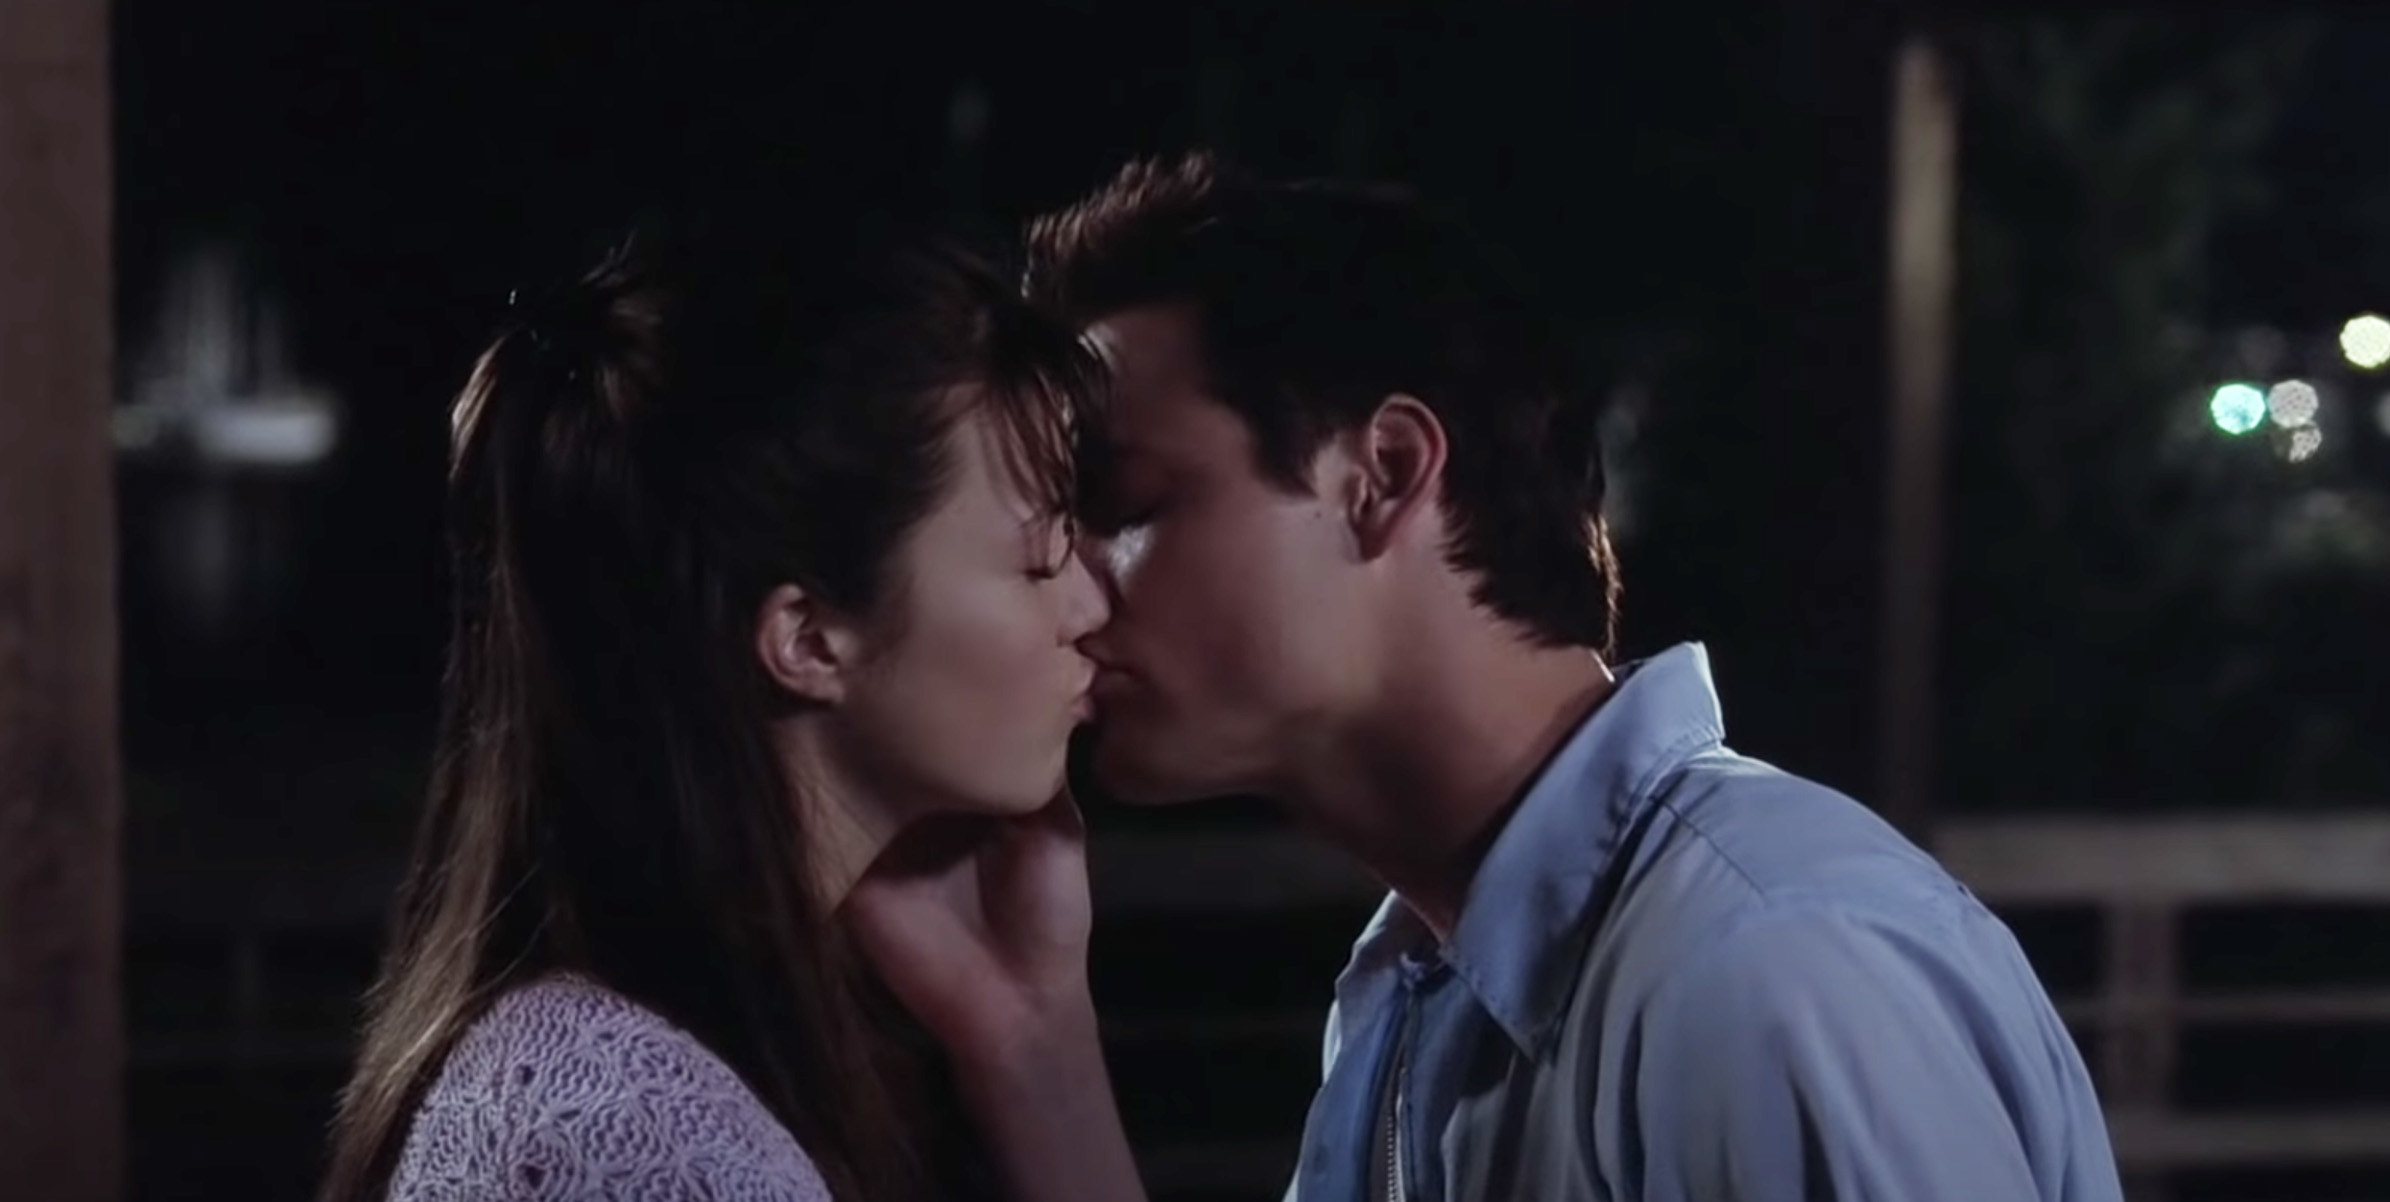 Shane and Mandy kissing in a scene from the film